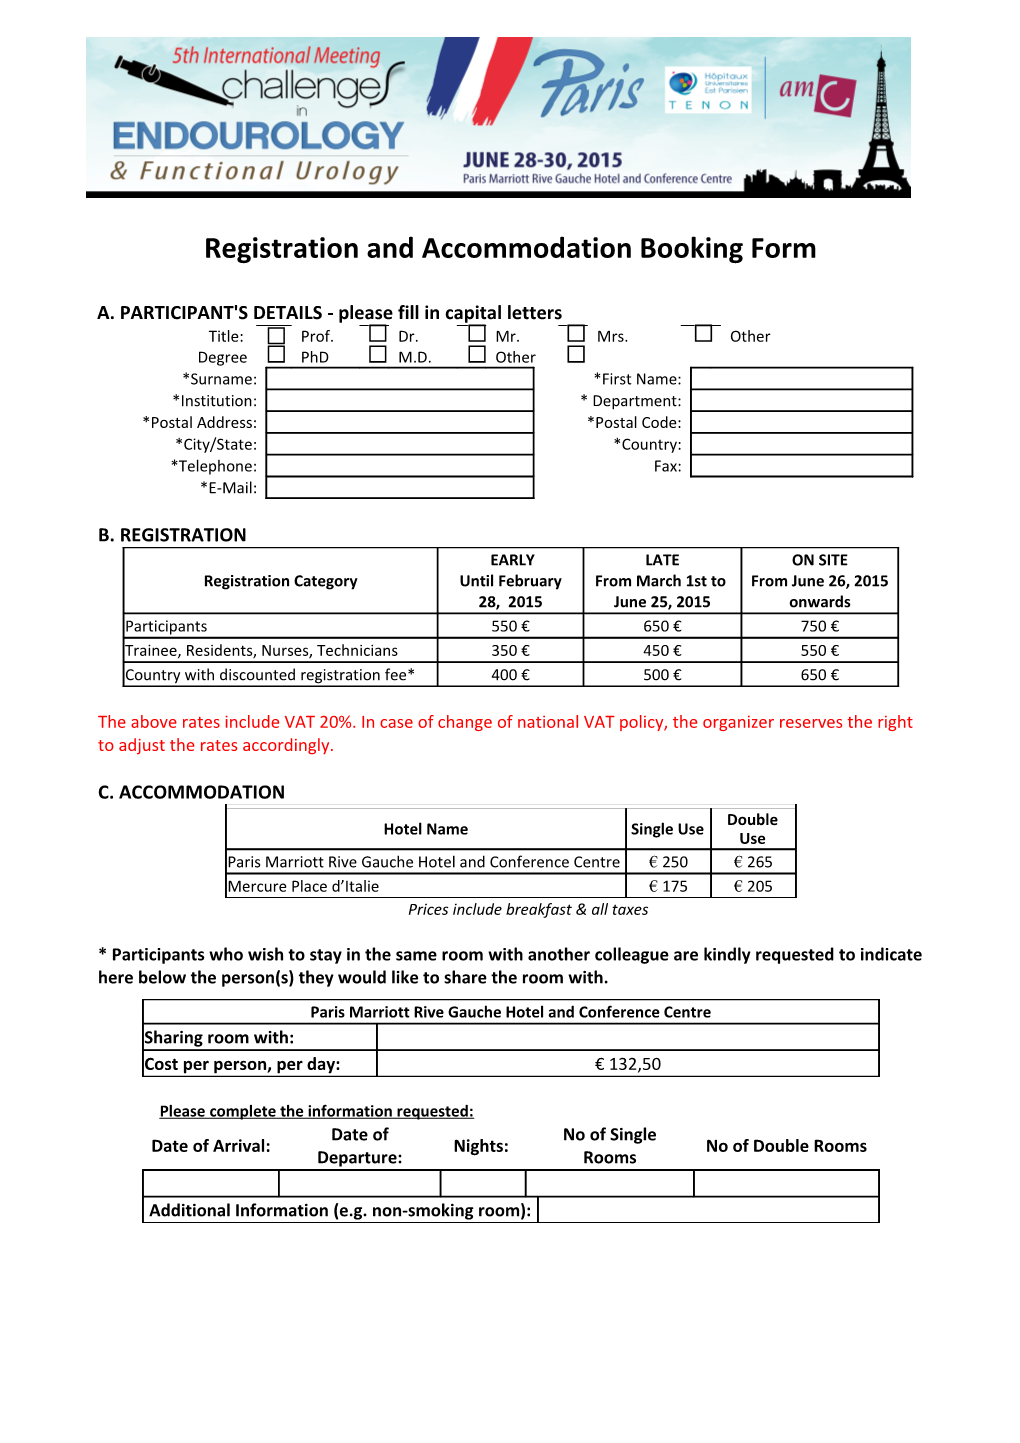 Registration and Accommodation Booking Form